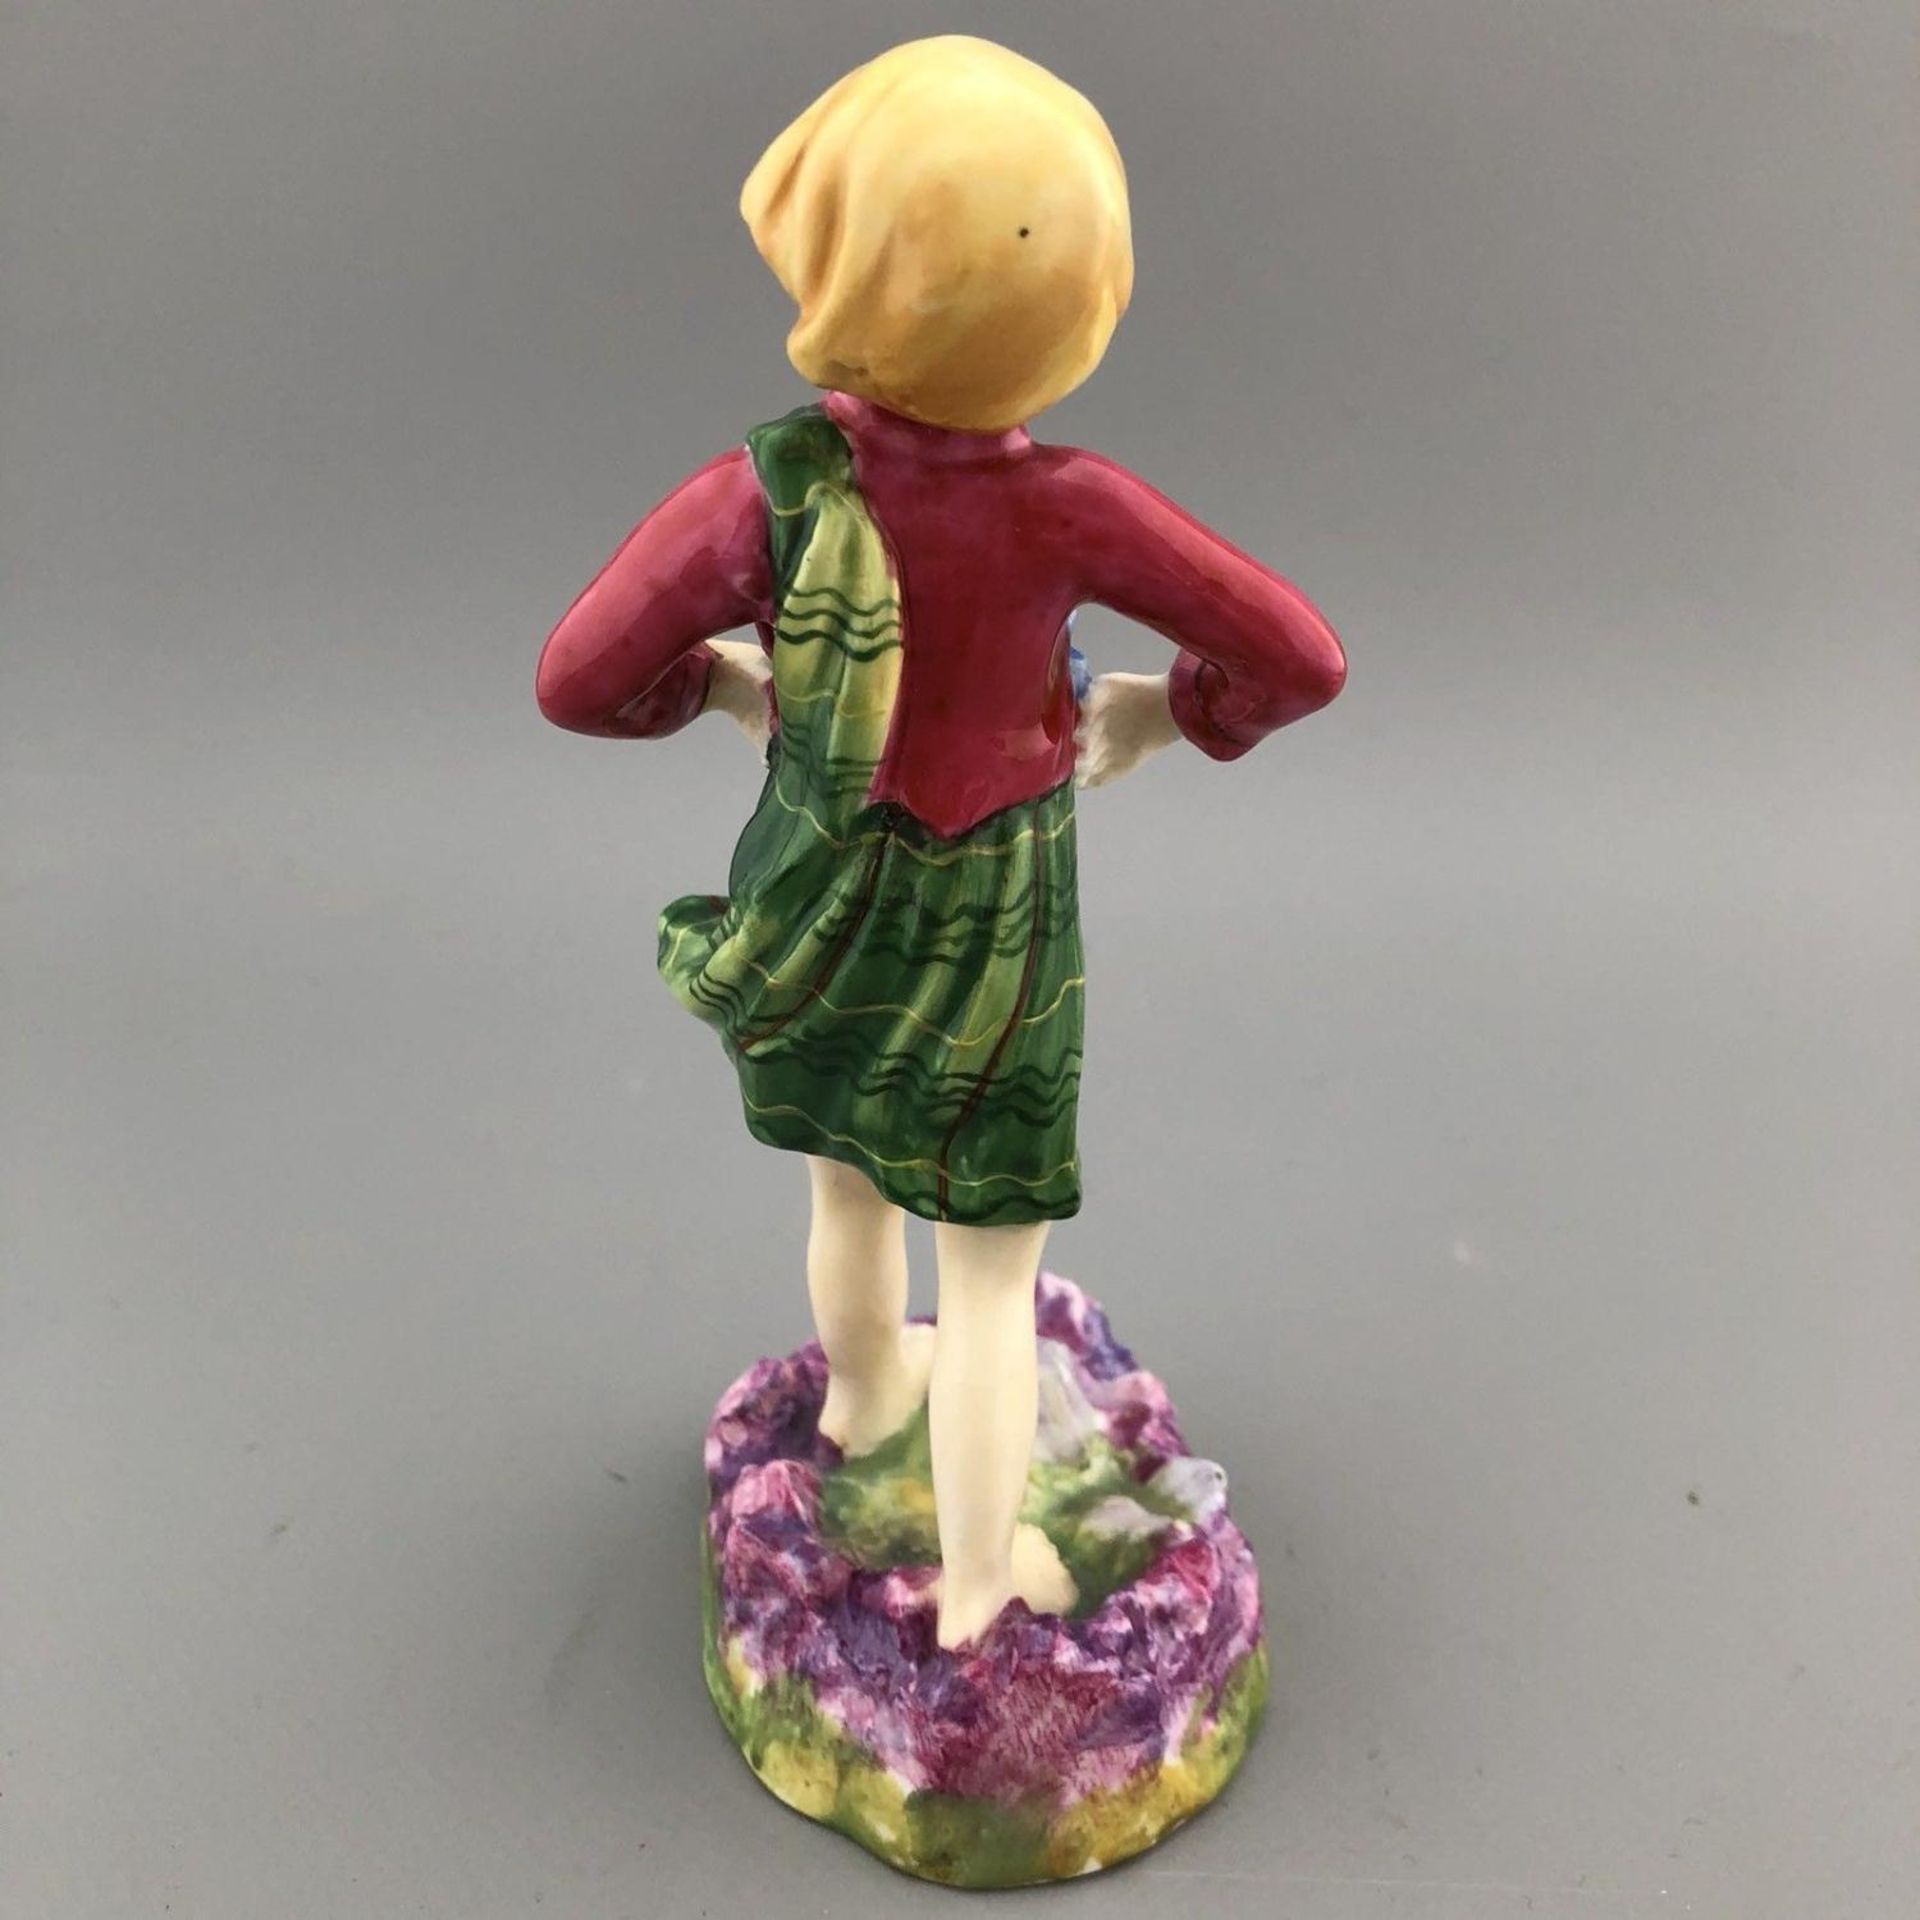 Rare 1930s Royal Worcester Porcelain Children of the Nations Figurine SCOTLAND - Image 4 of 6